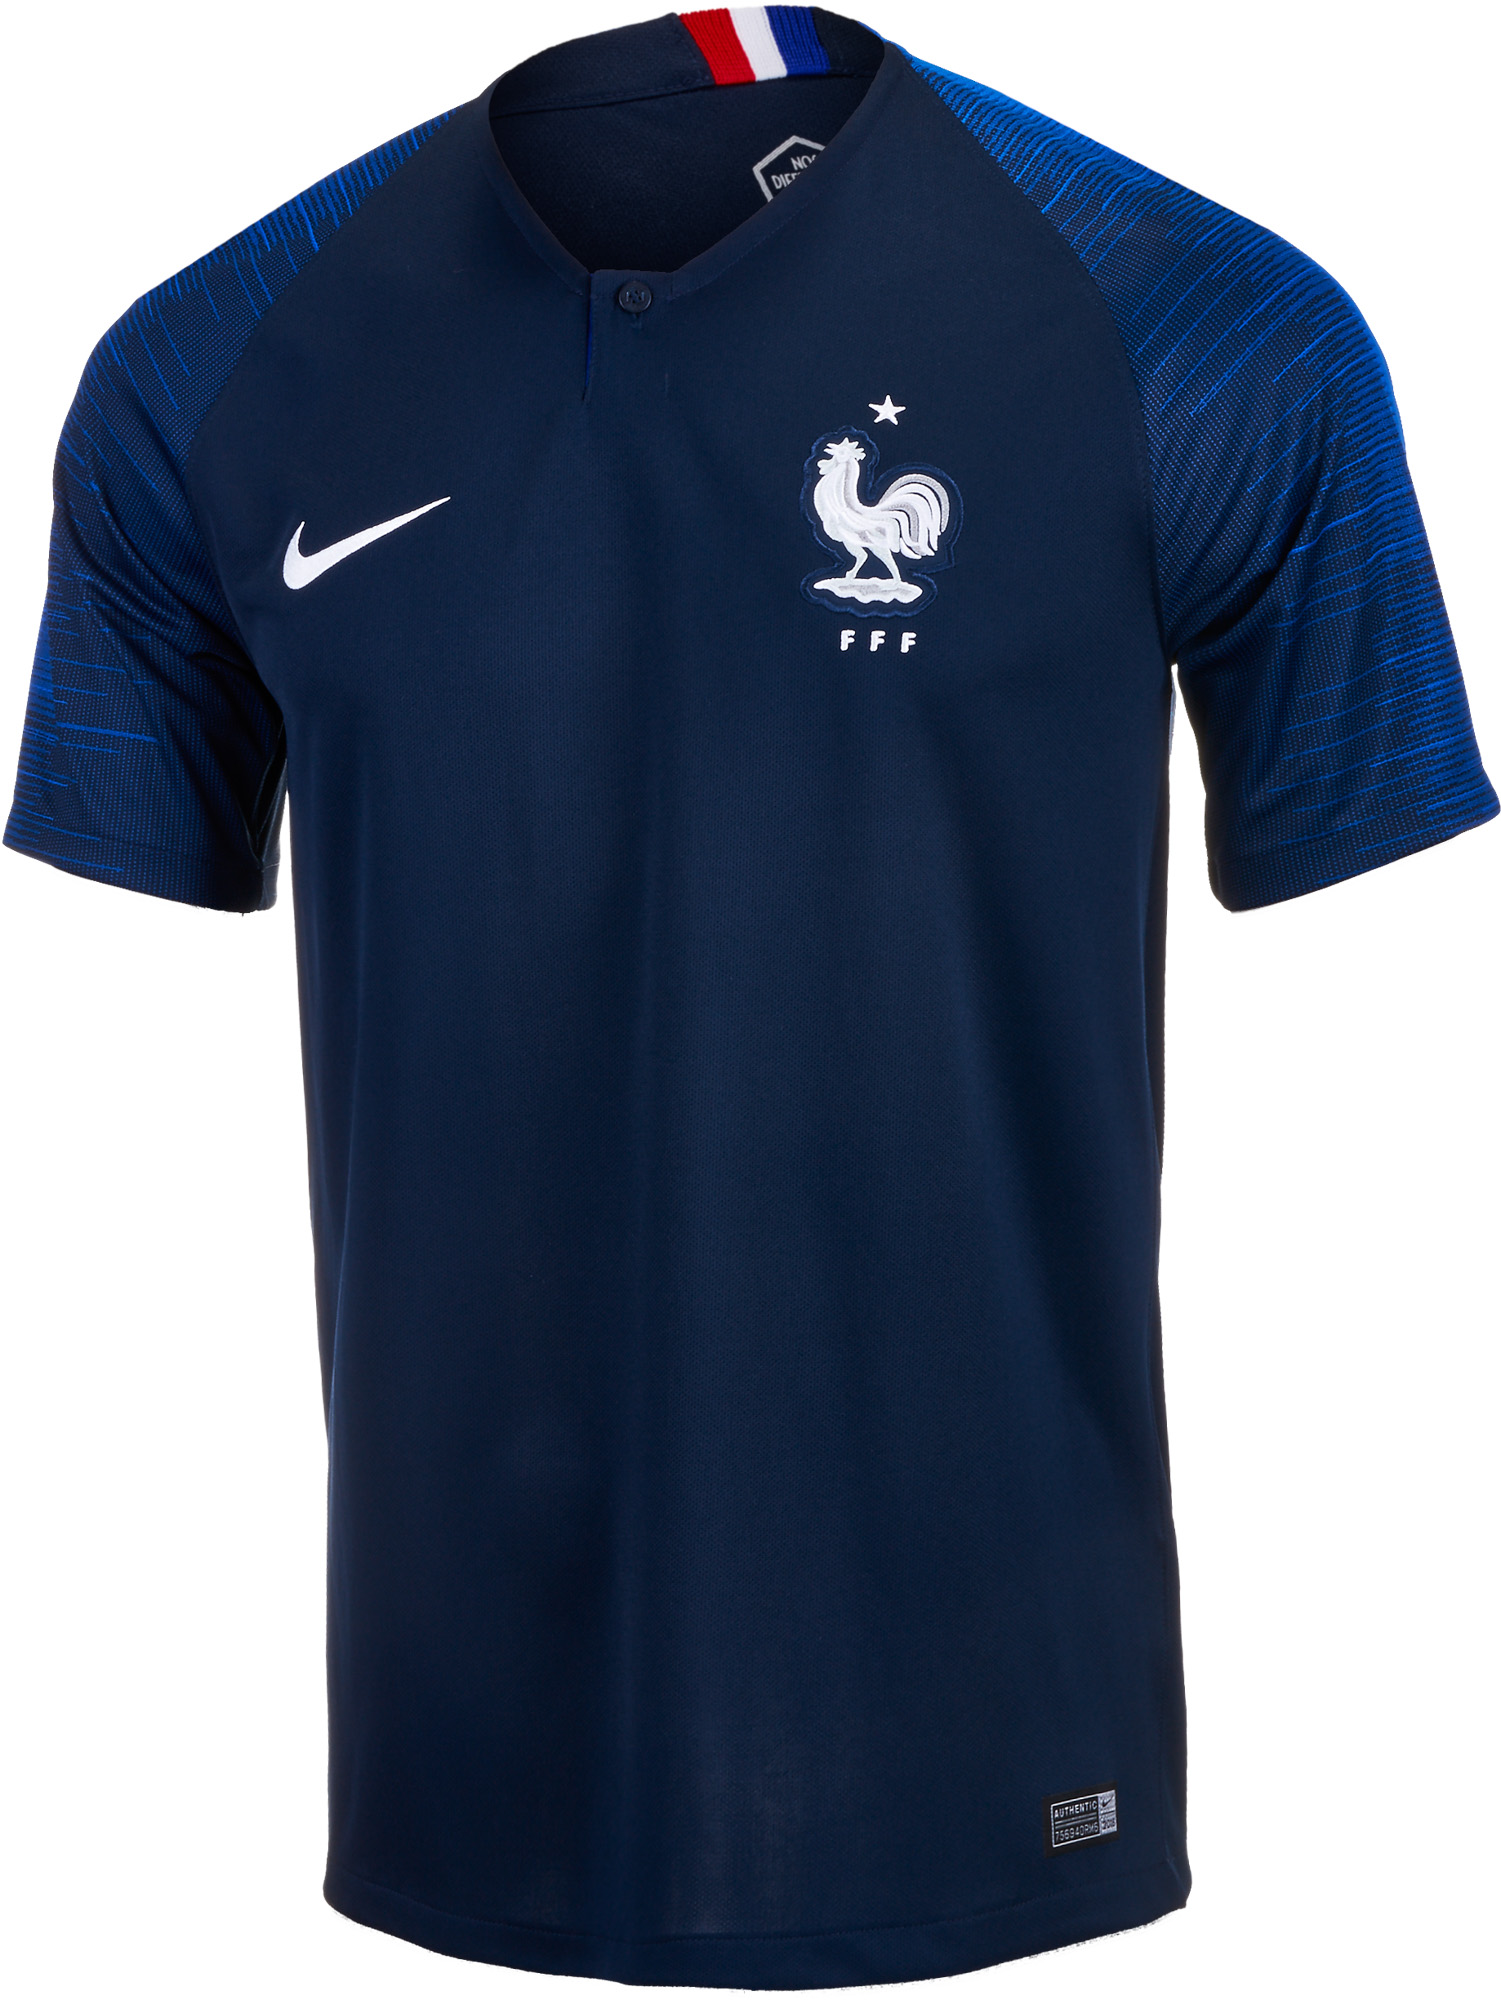 mbappe jersey youth france